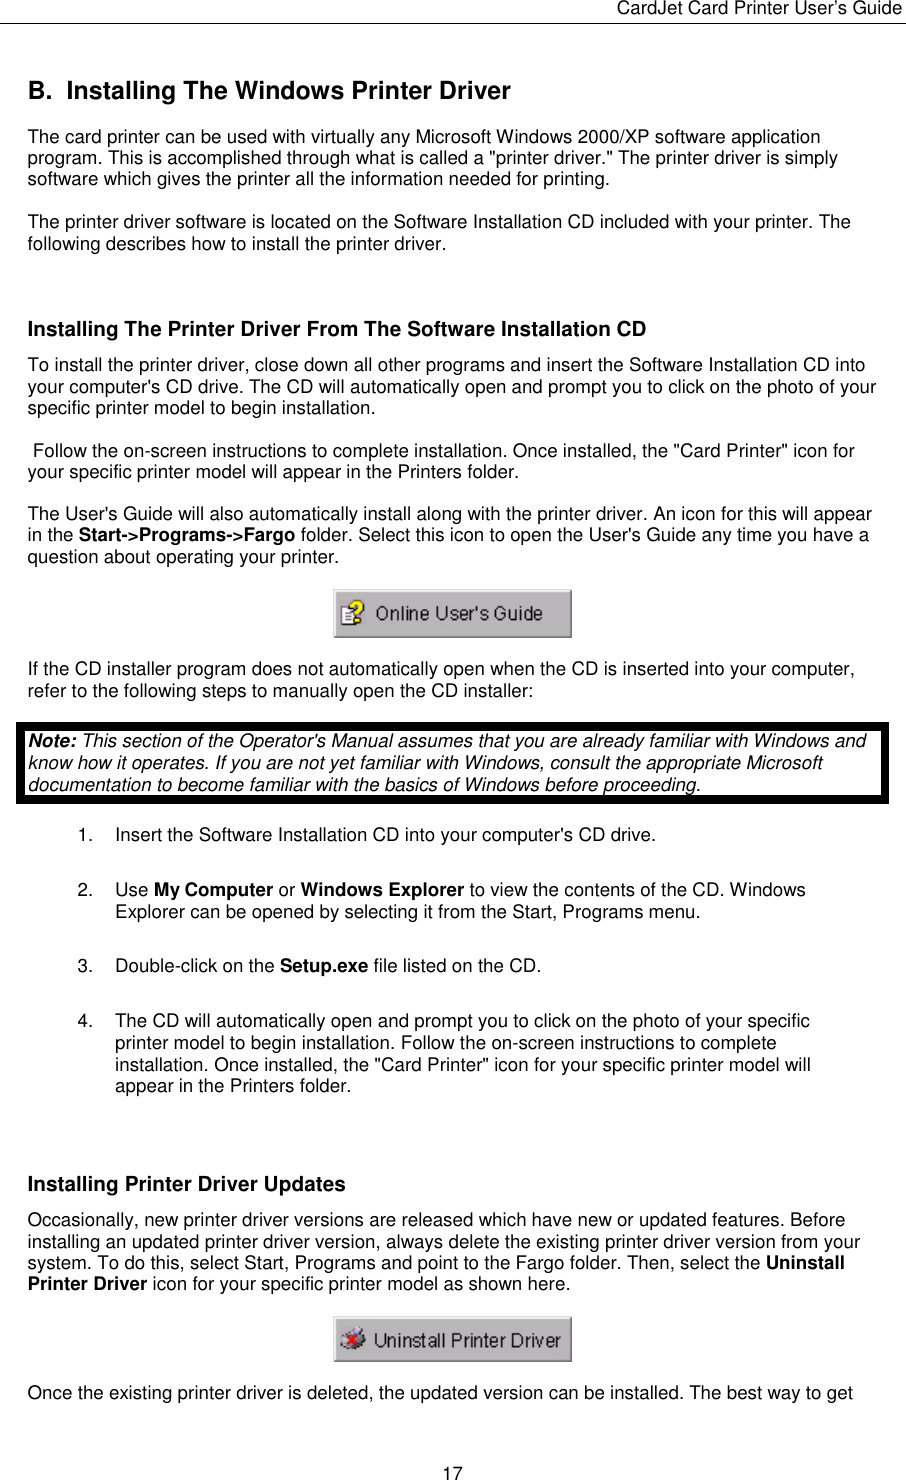 CardJet Card Printer User’s Guide  17 B.  Installing The Windows Printer Driver The card printer can be used with virtually any Microsoft Windows 2000/XP software application program. This is accomplished through what is called a &quot;printer driver.&quot; The printer driver is simply software which gives the printer all the information needed for printing. The printer driver software is located on the Software Installation CD included with your printer. The following describes how to install the printer driver.   Installing The Printer Driver From The Software Installation CD To install the printer driver, close down all other programs and insert the Software Installation CD into your computer&apos;s CD drive. The CD will automatically open and prompt you to click on the photo of your specific printer model to begin installation.  Follow the on-screen instructions to complete installation. Once installed, the &quot;Card Printer&quot; icon for your specific printer model will appear in the Printers folder. The User&apos;s Guide will also automatically install along with the printer driver. An icon for this will appear in the Start-&gt;Programs-&gt;Fargo folder. Select this icon to open the User&apos;s Guide any time you have a question about operating your printer.  If the CD installer program does not automatically open when the CD is inserted into your computer, refer to the following steps to manually open the CD installer: Note: This section of the Operator&apos;s Manual assumes that you are already familiar with Windows and know how it operates. If you are not yet familiar with Windows, consult the appropriate Microsoft documentation to become familiar with the basics of Windows before proceeding. 1.  Insert the Software Installation CD into your computer&apos;s CD drive. 2. Use My Computer or Windows Explorer to view the contents of the CD. Windows Explorer can be opened by selecting it from the Start, Programs menu. 3. Double-click on the Setup.exe file listed on the CD. 4.  The CD will automatically open and prompt you to click on the photo of your specific printer model to begin installation. Follow the on-screen instructions to complete installation. Once installed, the &quot;Card Printer&quot; icon for your specific printer model will appear in the Printers folder.   Installing Printer Driver Updates Occasionally, new printer driver versions are released which have new or updated features. Before installing an updated printer driver version, always delete the existing printer driver version from your system. To do this, select Start, Programs and point to the Fargo folder. Then, select the Uninstall Printer Driver icon for your specific printer model as shown here.  Once the existing printer driver is deleted, the updated version can be installed. The best way to get 